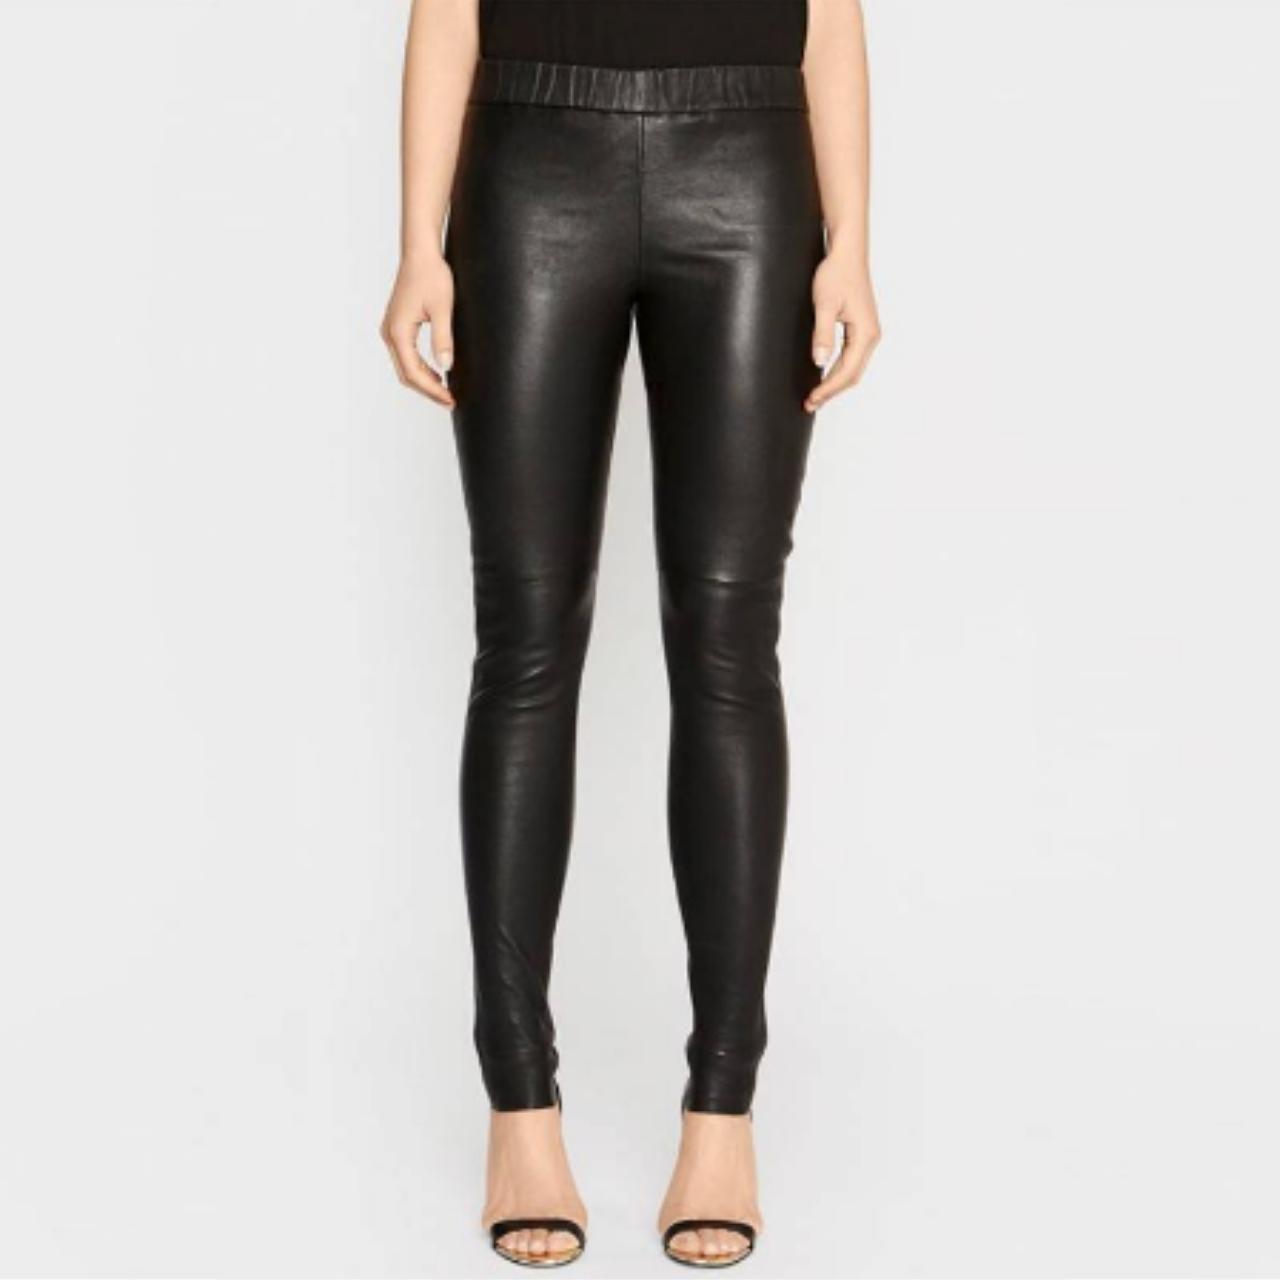 Camilla and Marc Women's Brown and Black Leggings